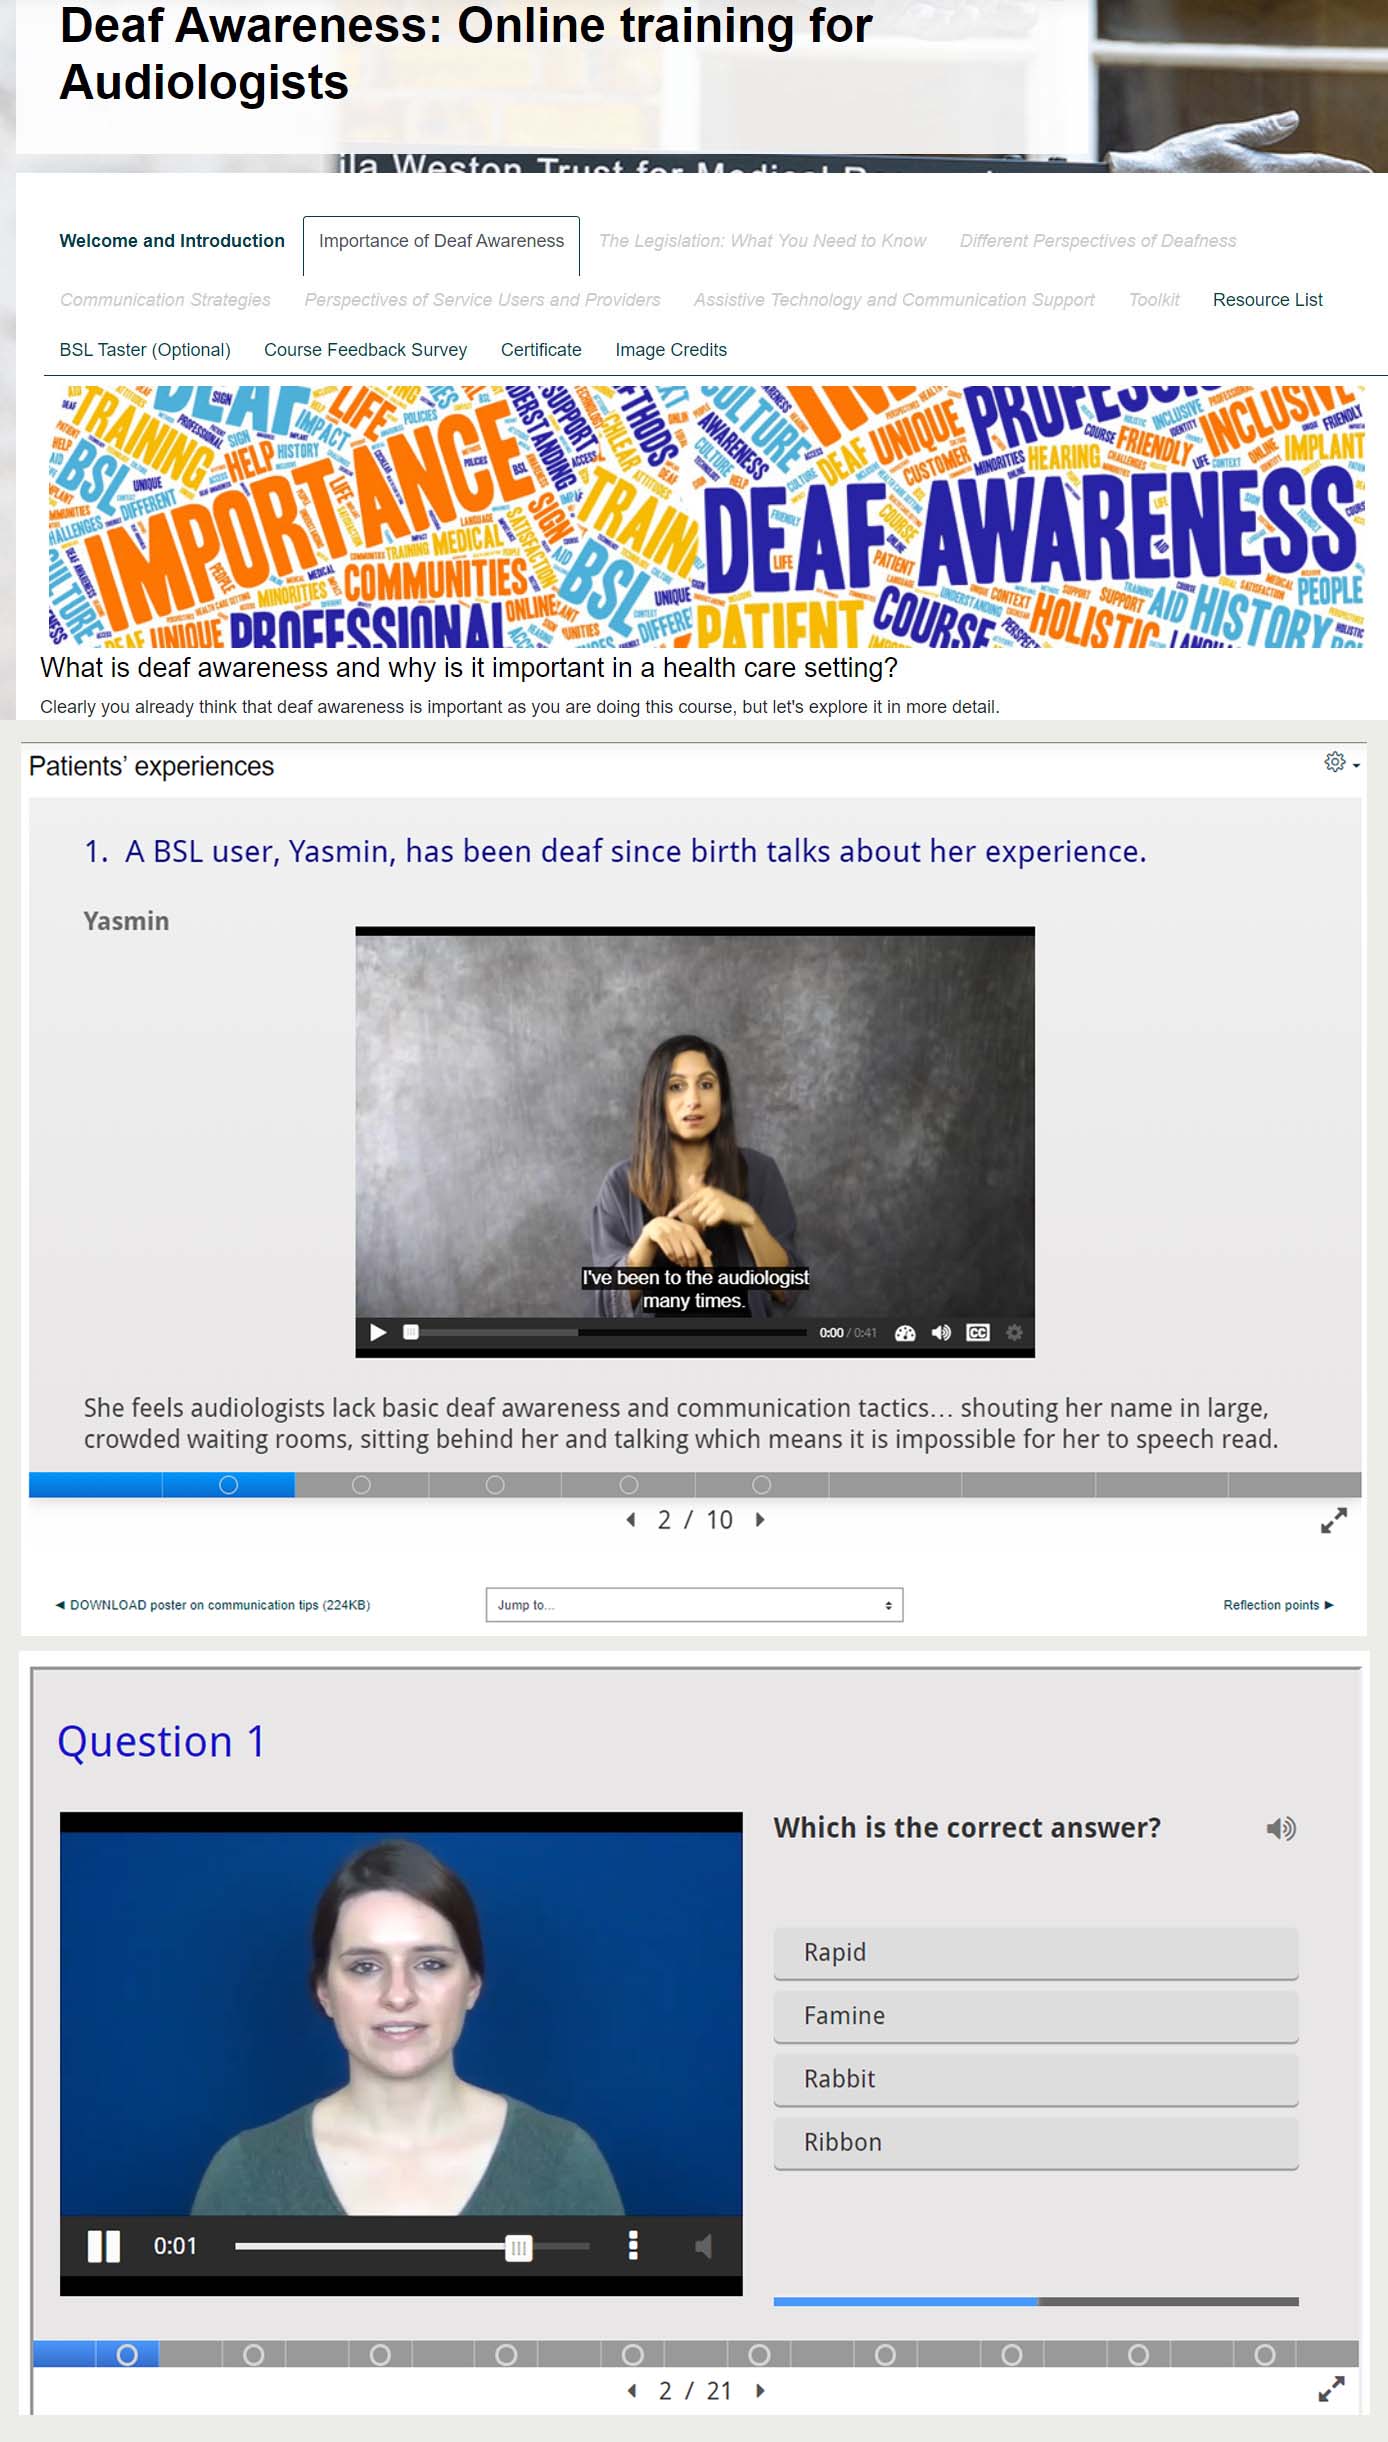 A image showing a front page of the course, a video page, and the page with a lip reading game.